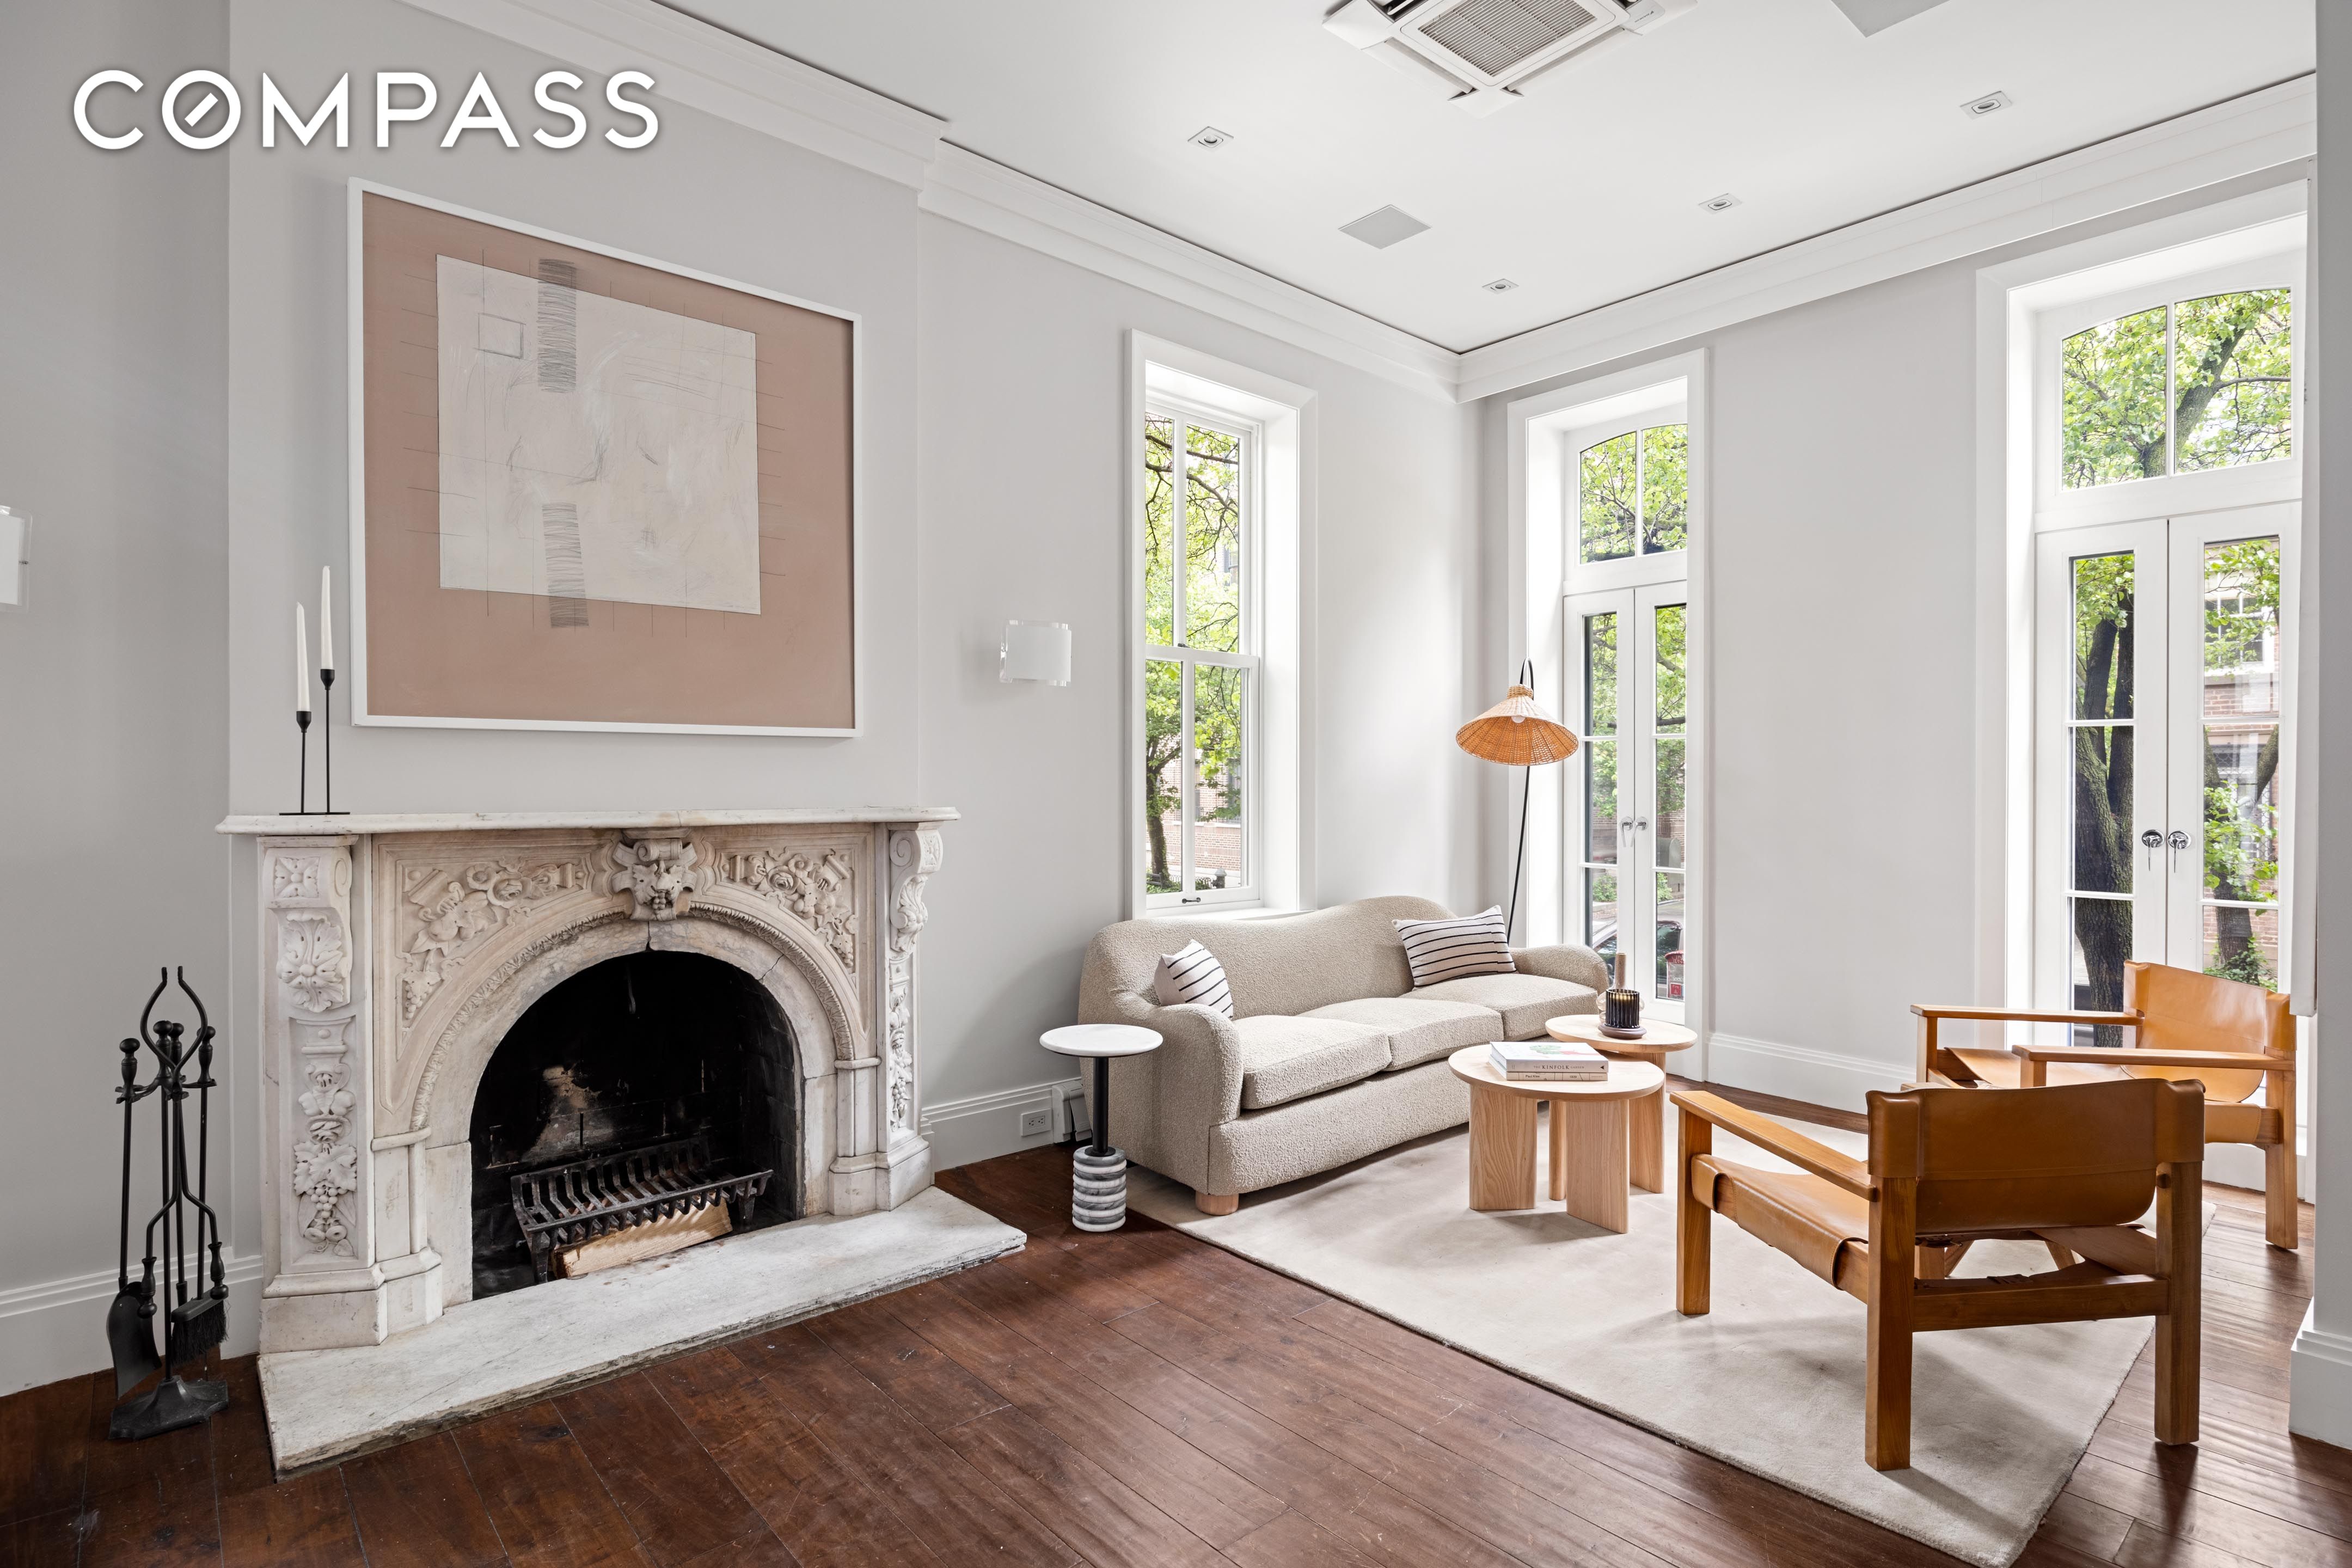 214 West 11th Street, West Village, Downtown, NYC - 5 Bedrooms  
4.5 Bathrooms  
8 Rooms - 